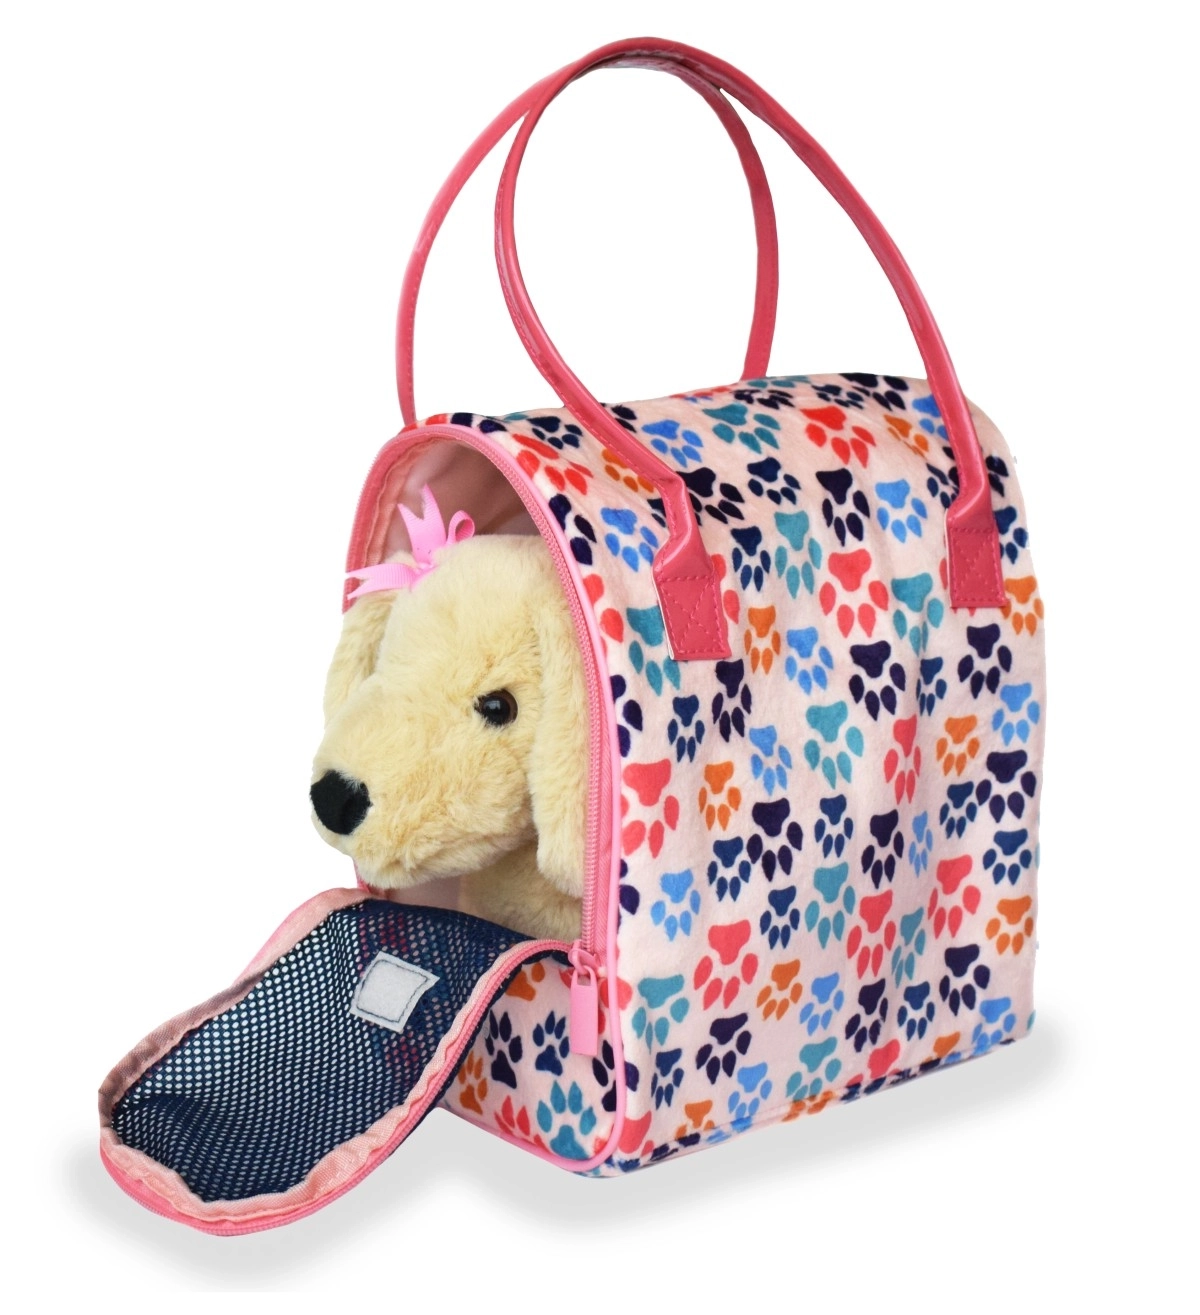 Mirada Plush Pet In A Bag Beige Dog, Soft Toys For Kids, 3Y+